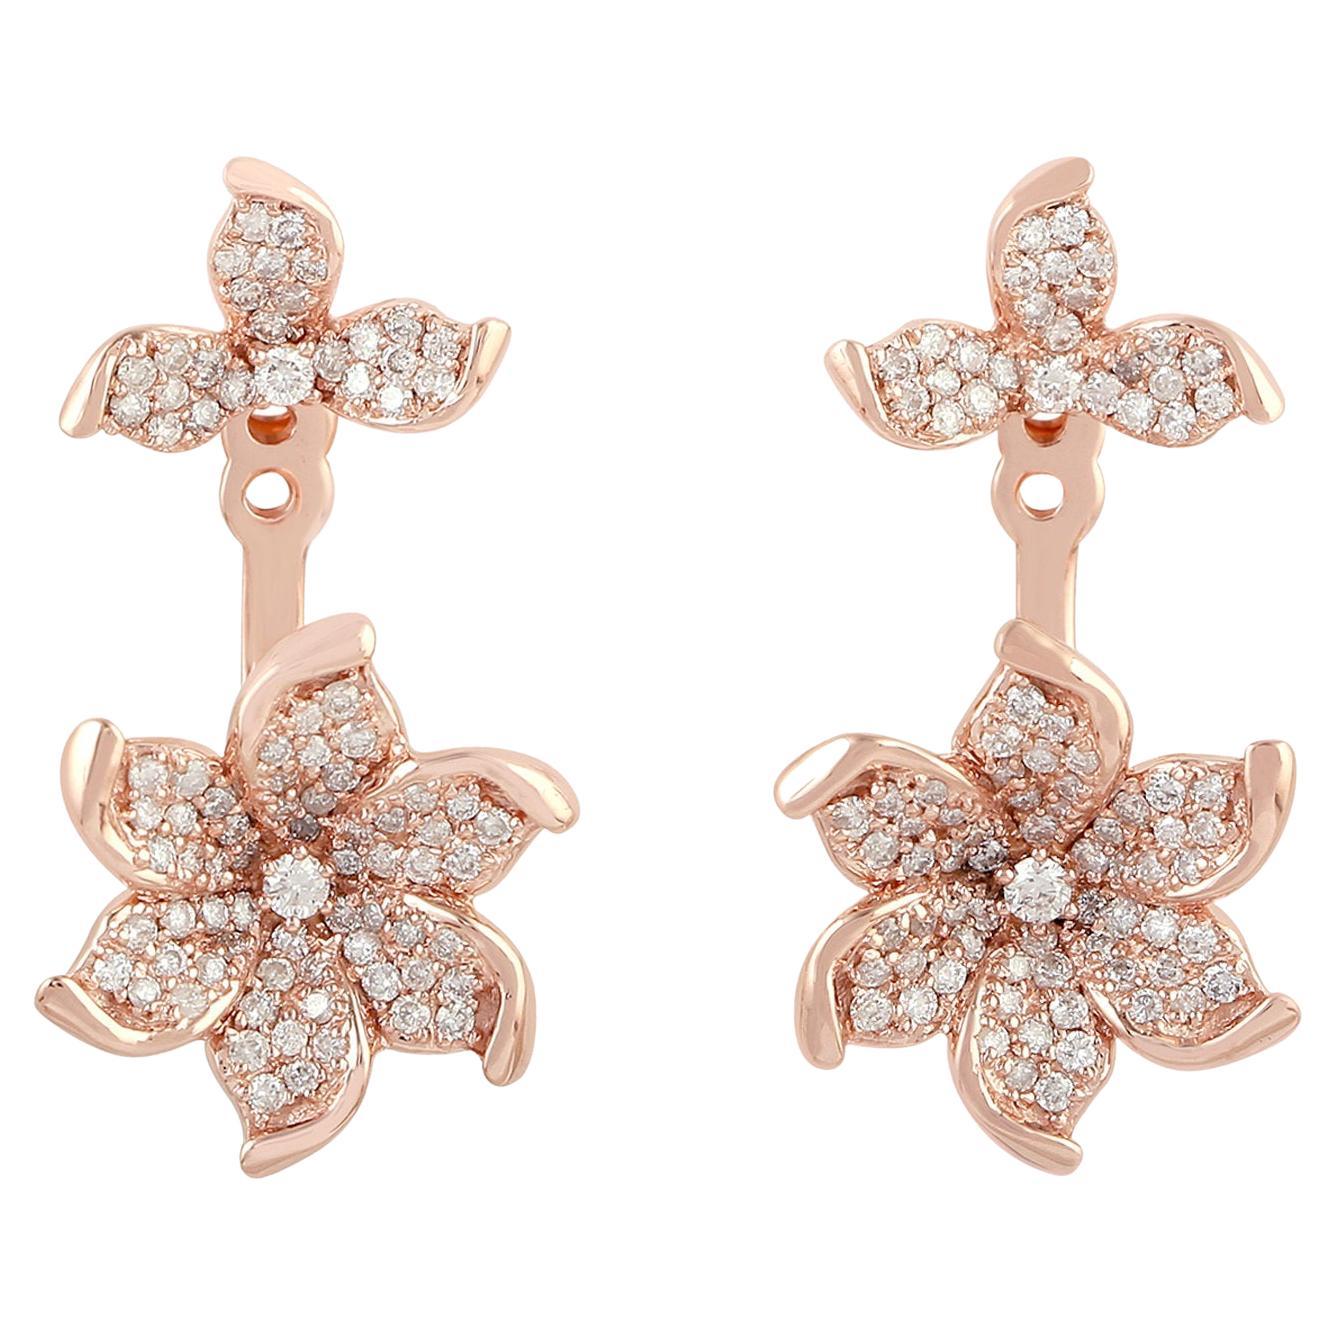 Designer Flower Shaped Earrings with Pave Diamonds Made in 18k Rose Gold